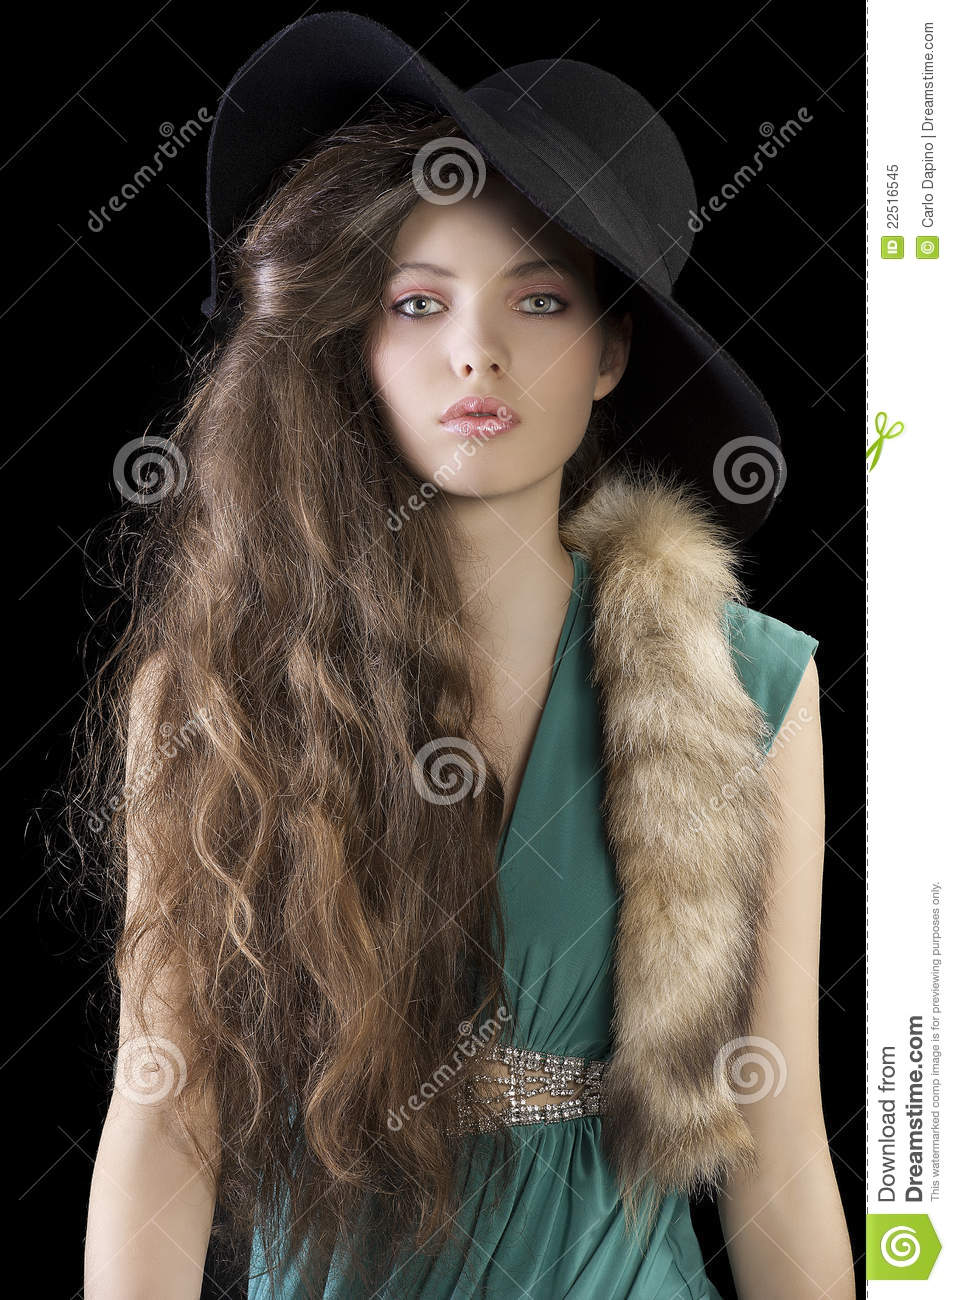 Sophisticated Elegant Woman Portrait With Hair Style And Wearing A